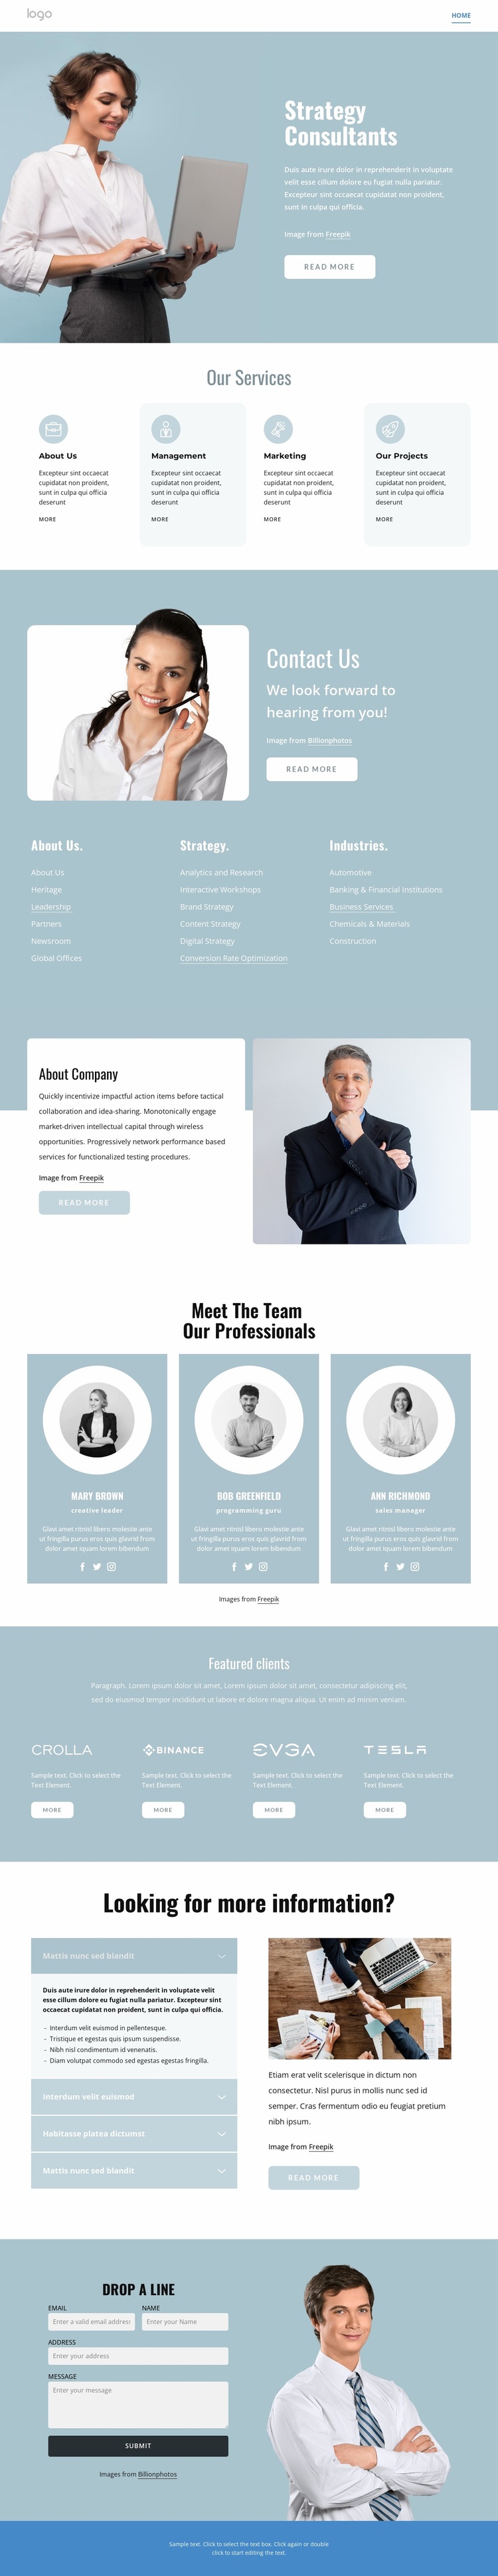 Strategy connsultants Website Template